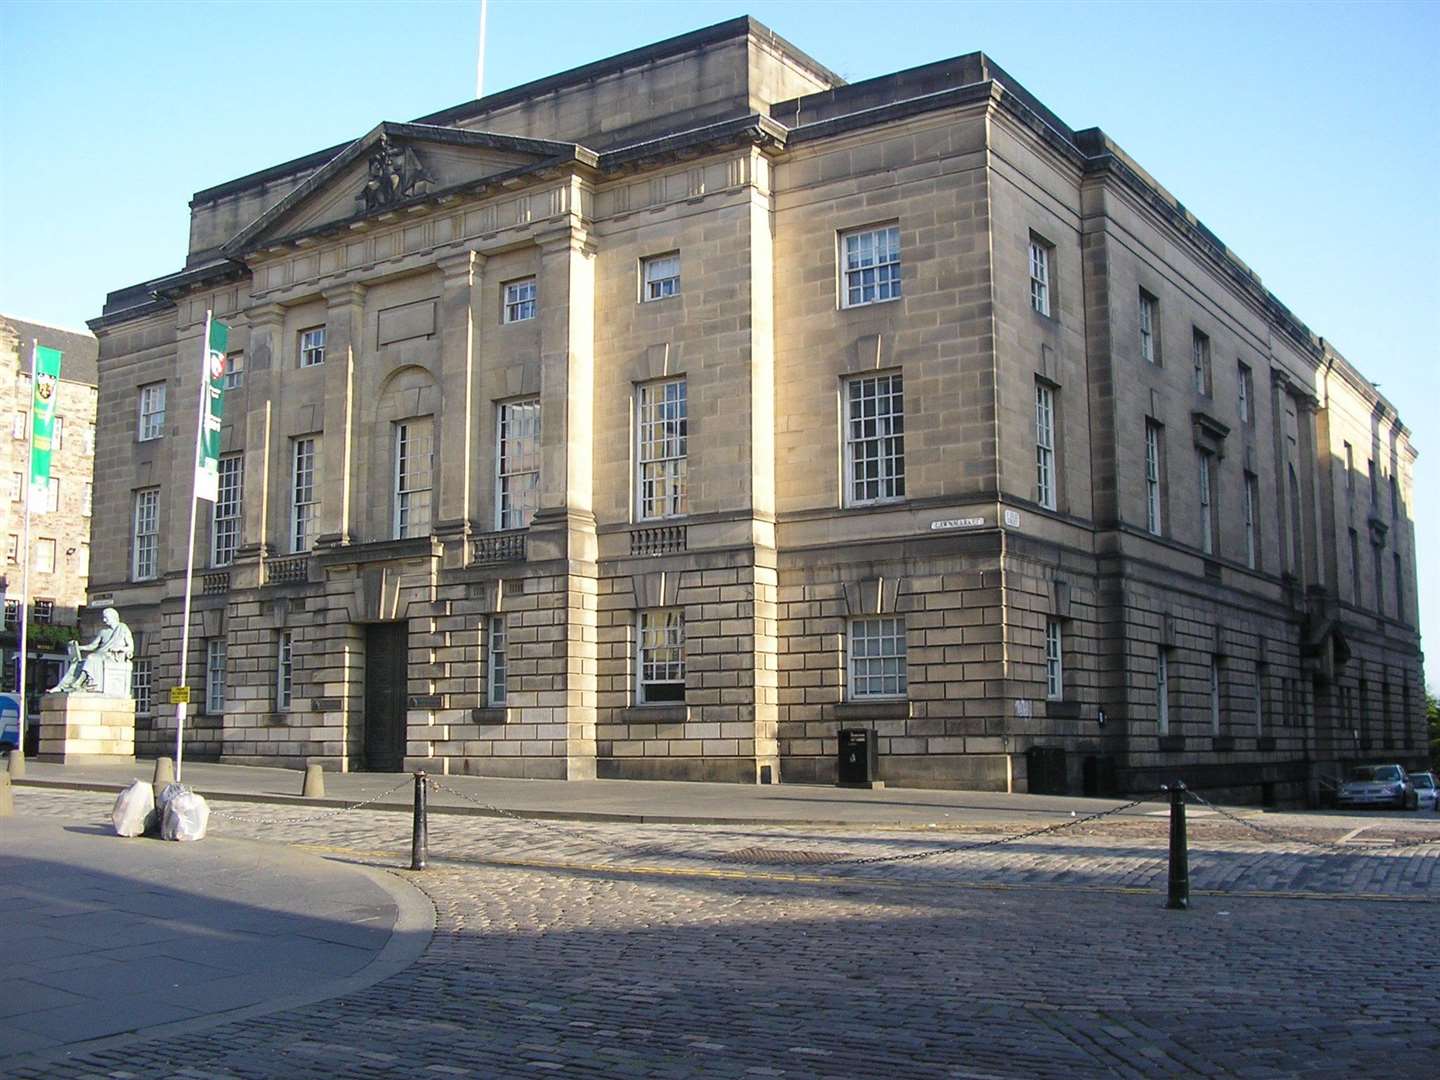 The former Lossiemouth resident was jailed for seven years at the High Court in Edinburgh today.